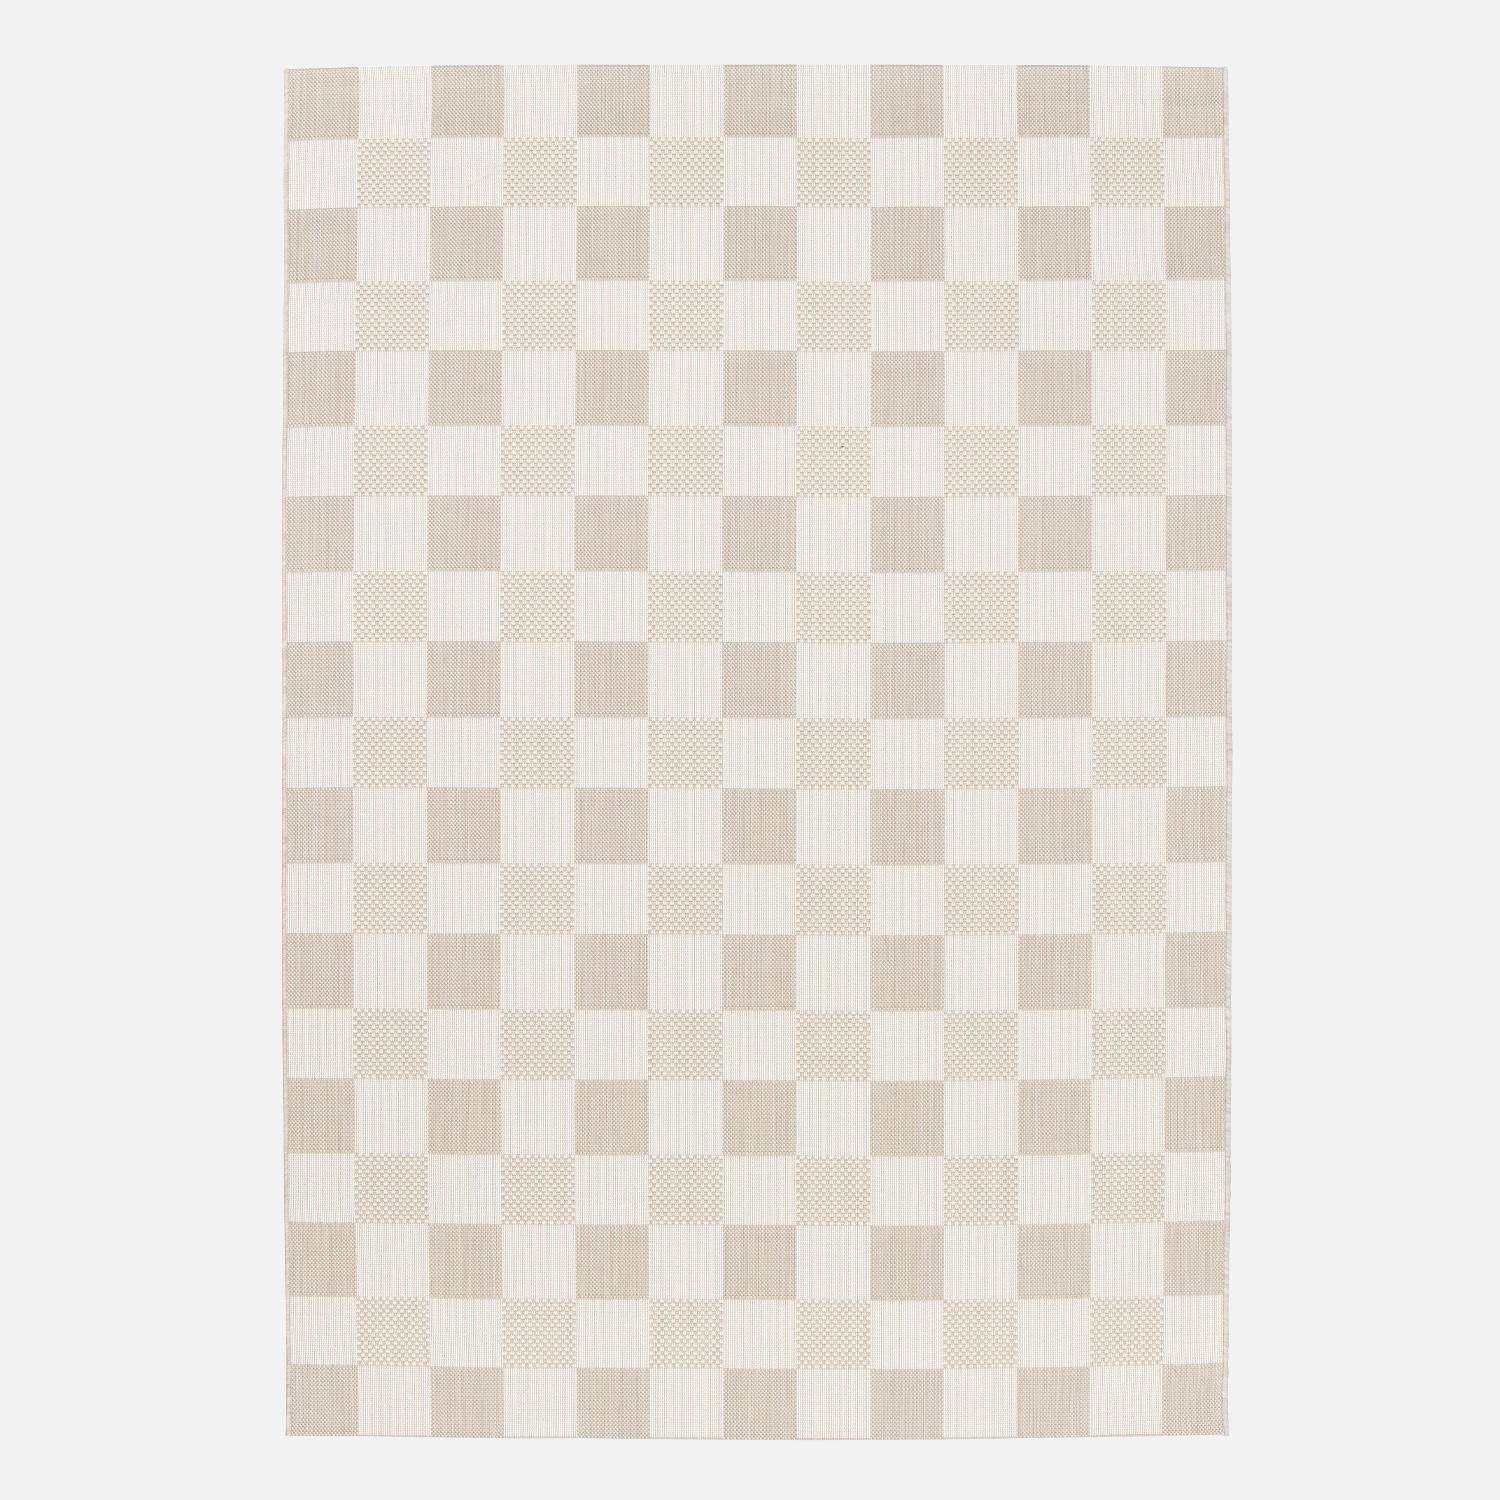 Indoor/outdoor carpet with beige chequered pattern, recycled polyester, Damian, 120 x 170 cm,sweeek,Photo2